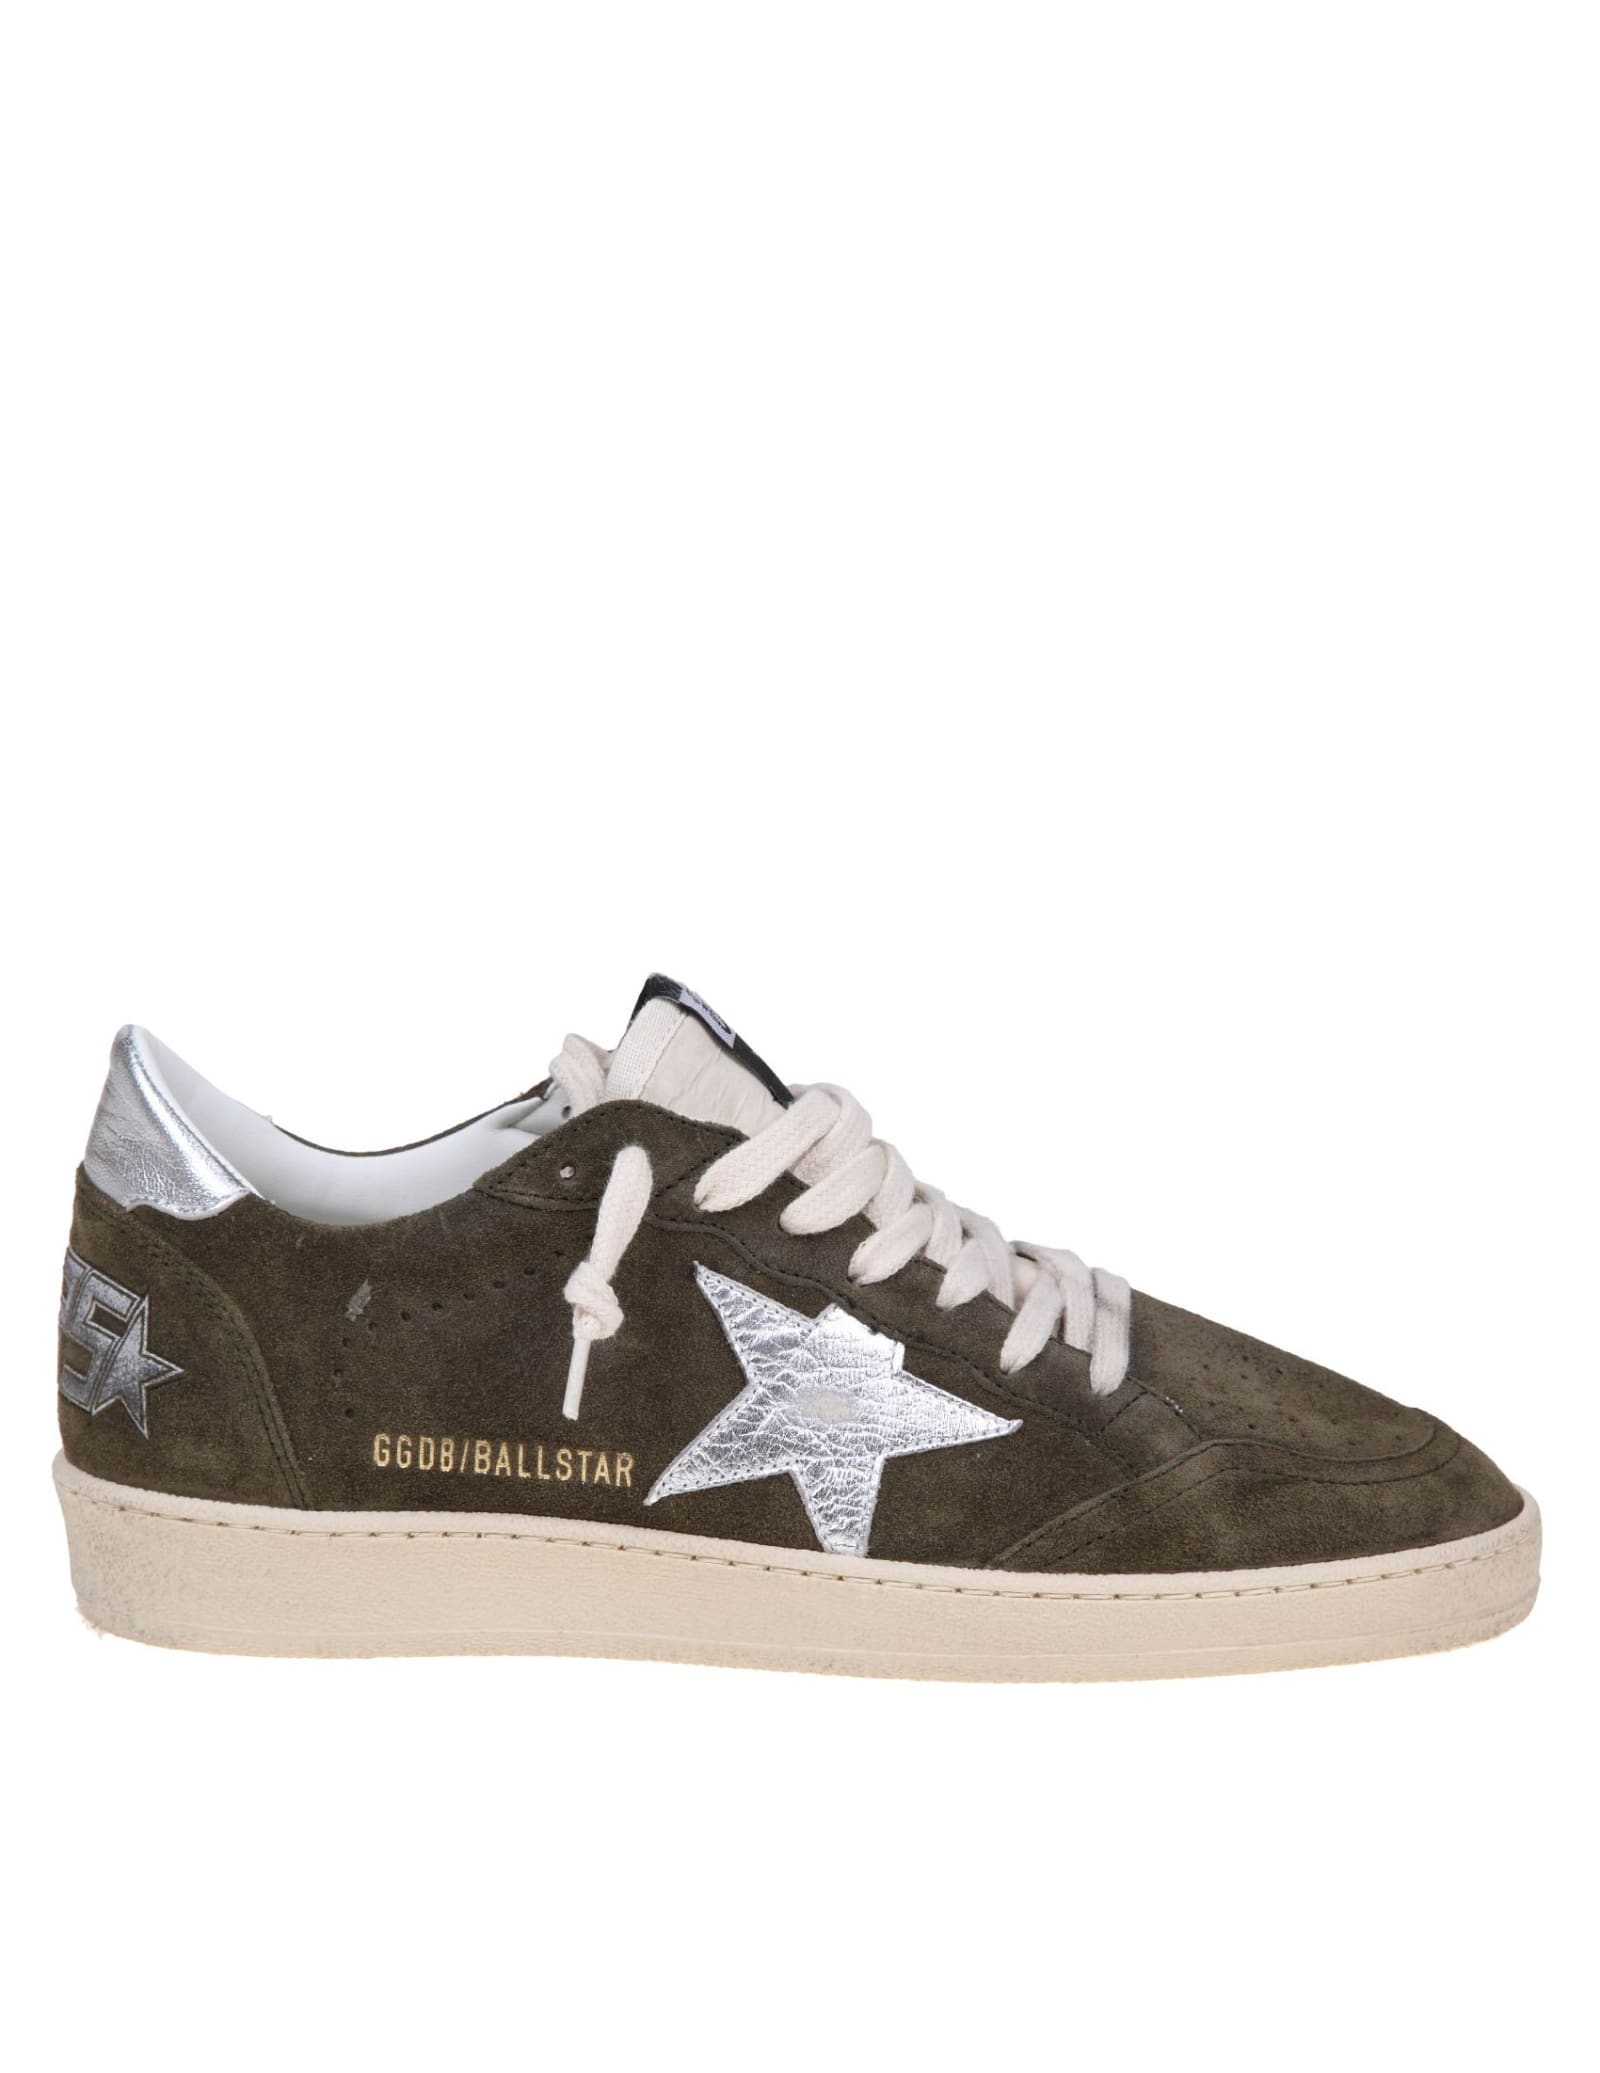 Shop Golden Goose Ball Star Sneakers In Olive Green Suede